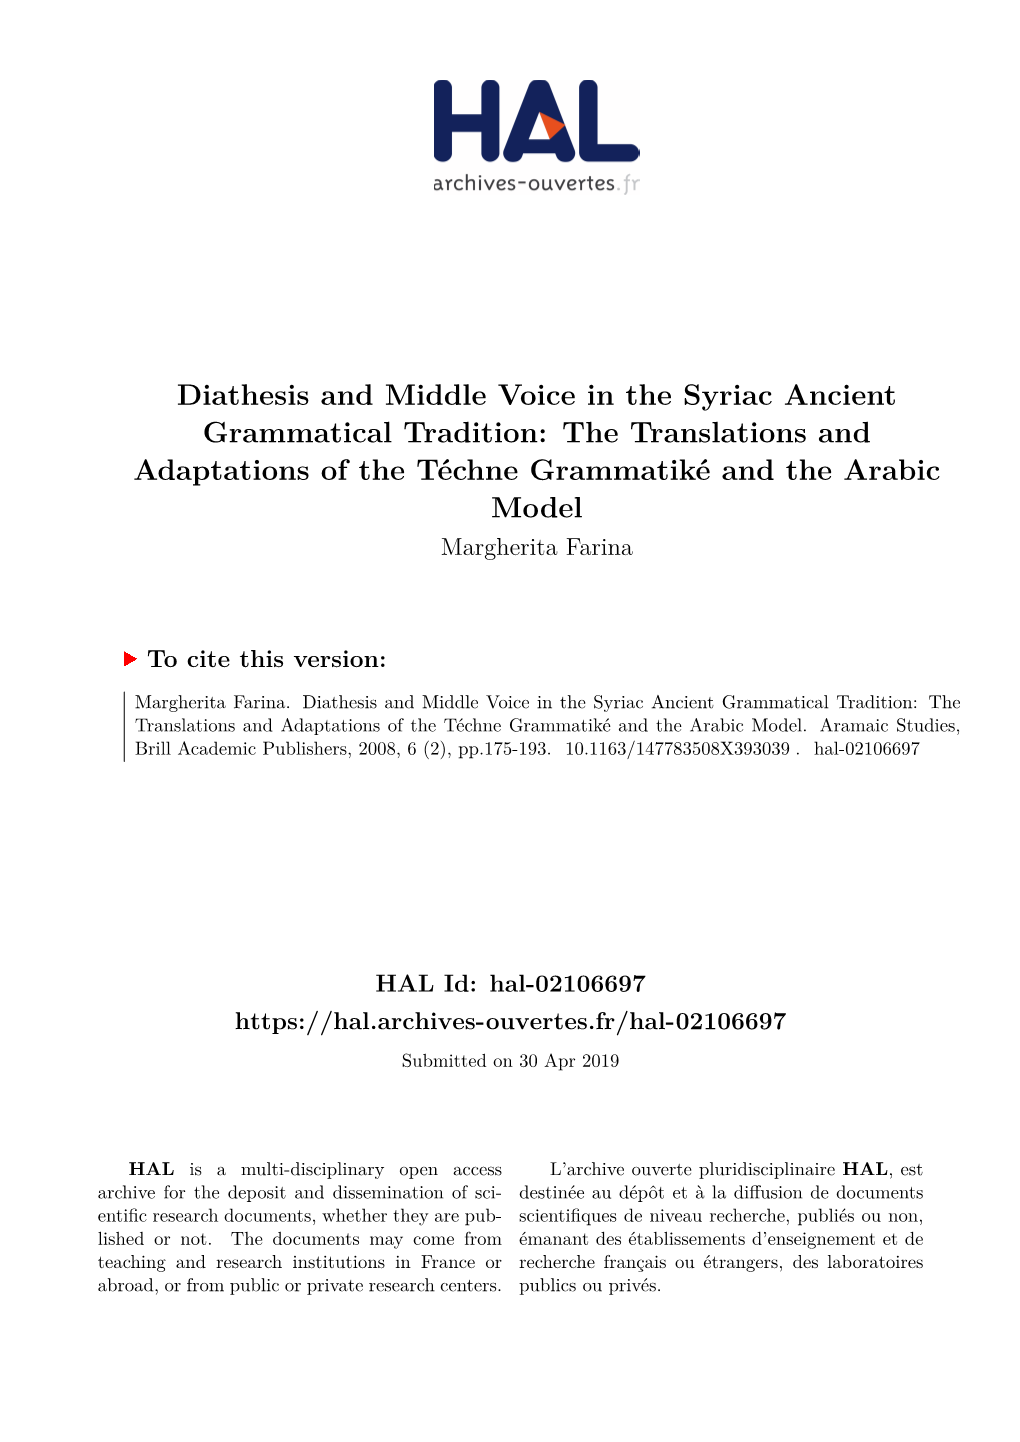 Diathesis and Middle Voice in the Syriac Ancient Grammatical Tradition